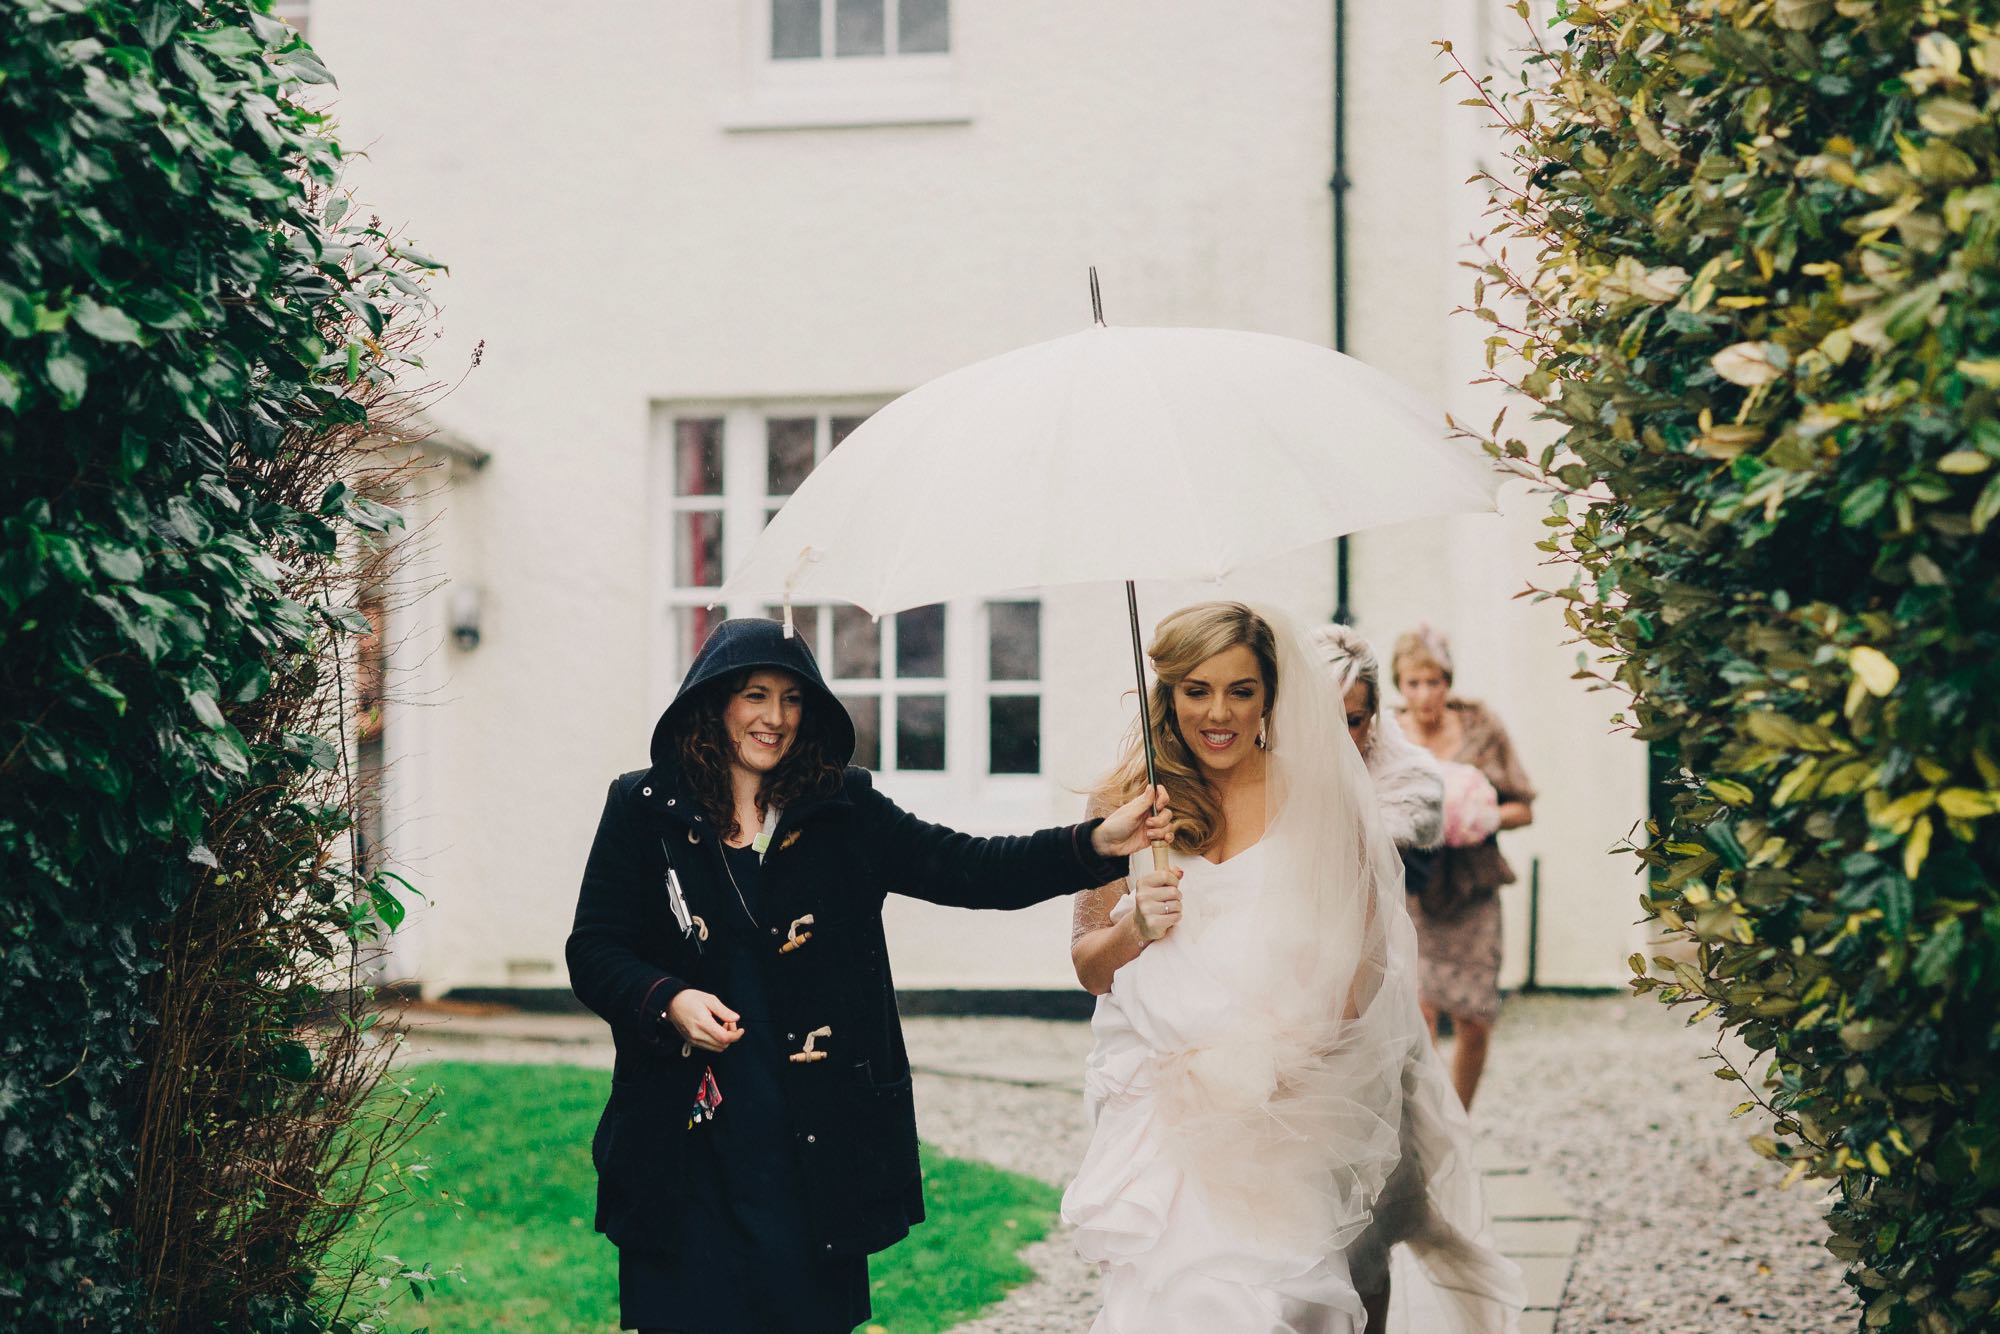 This image shows a member of the Green team staff holding an umbrella over a bride's head as she makes her way towards her ceremony. The picture is taken in front of the farmhouse. There is a bush on either side of the image framing shot. You can see the corner of the house in the background. The farmhouse is white and has Georgian style windows. The member of staff is on the left and she's wearing a blue duffle coat with the hood up as it is raining. She is holding a white umbrella above the bride's head. Both of them are smiling. The bride has dark blond hair that she is wearing loose. She is wearing a short sleeved white gown and a veil. The dress is long and layered and she is holding it up so she can walk. In the background, walking you can see two ladies who are part of the bridal party.